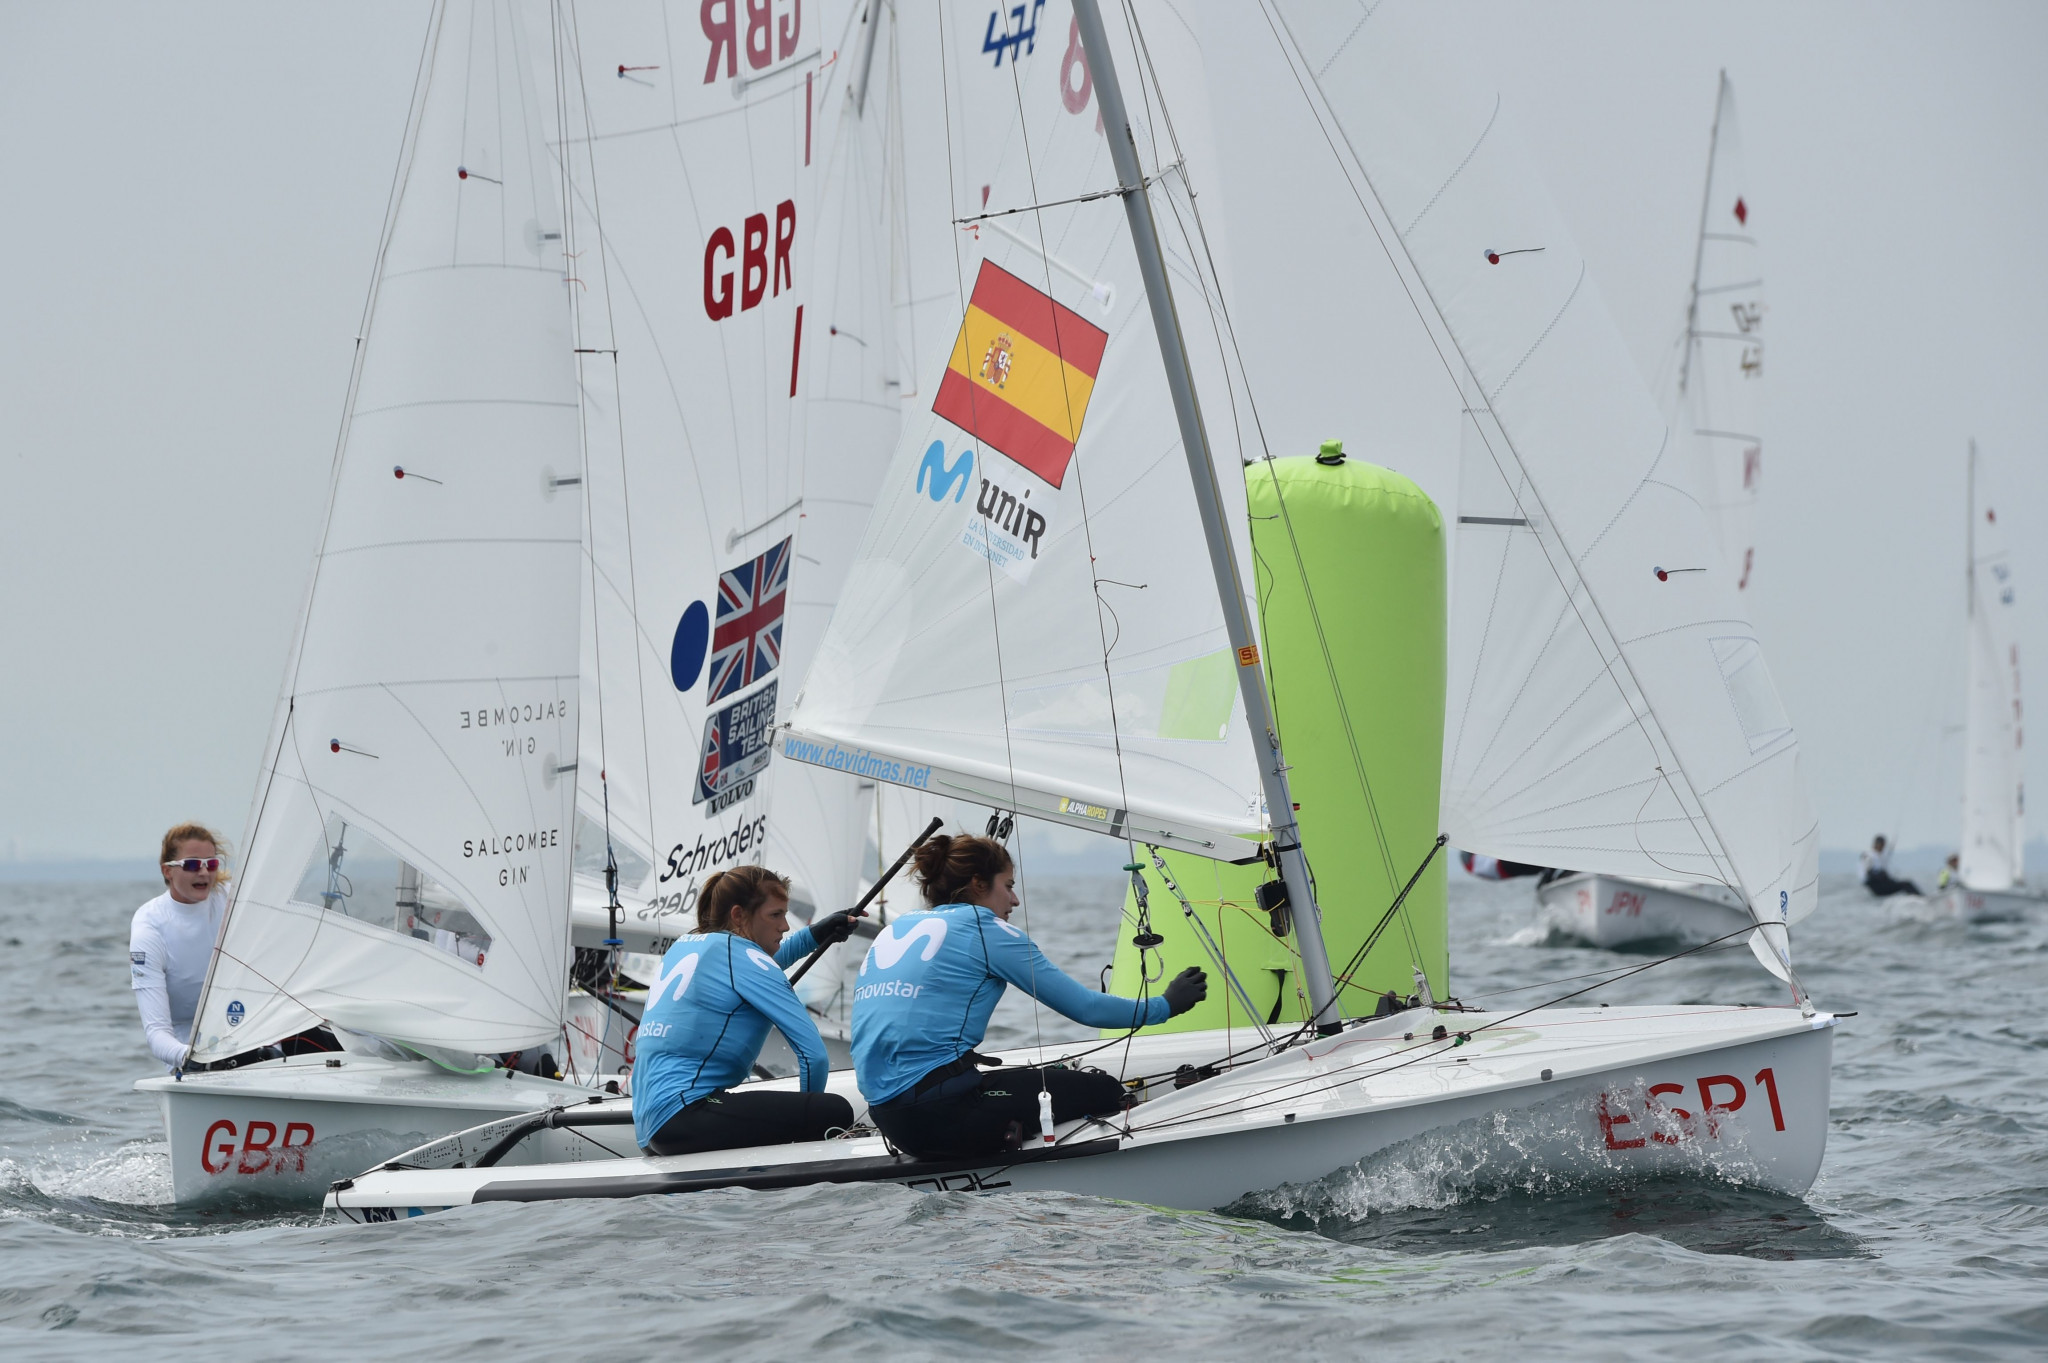 Mas and Cantero take lead of women's contest at 470 World Championships